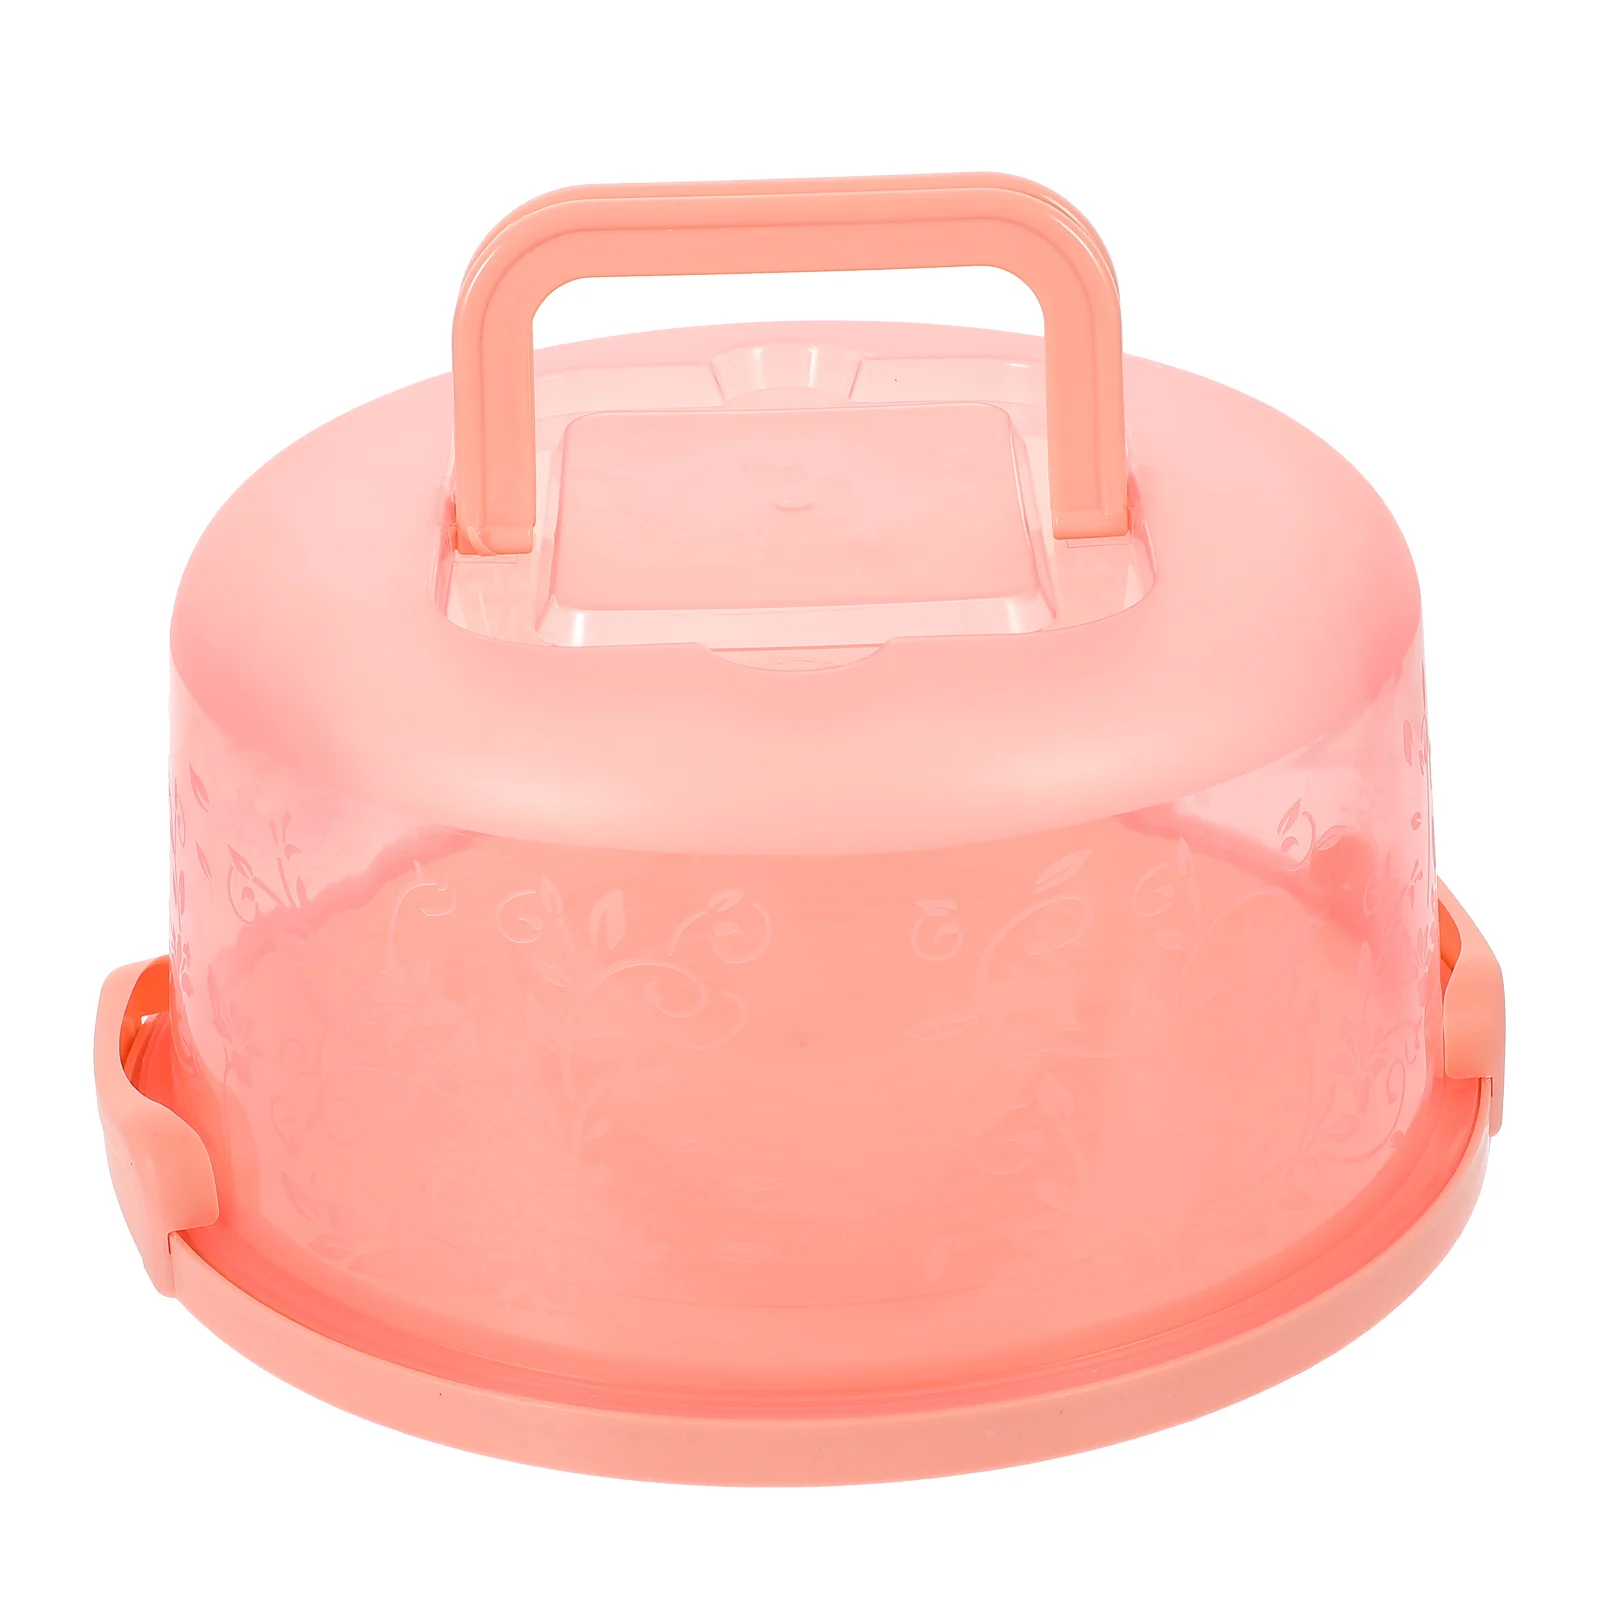 

Cake Box Carrier Portable Container Holder Lid Cupcake Baking Plastic Containers Handle Stand Round Storage Pastry Keeper Server